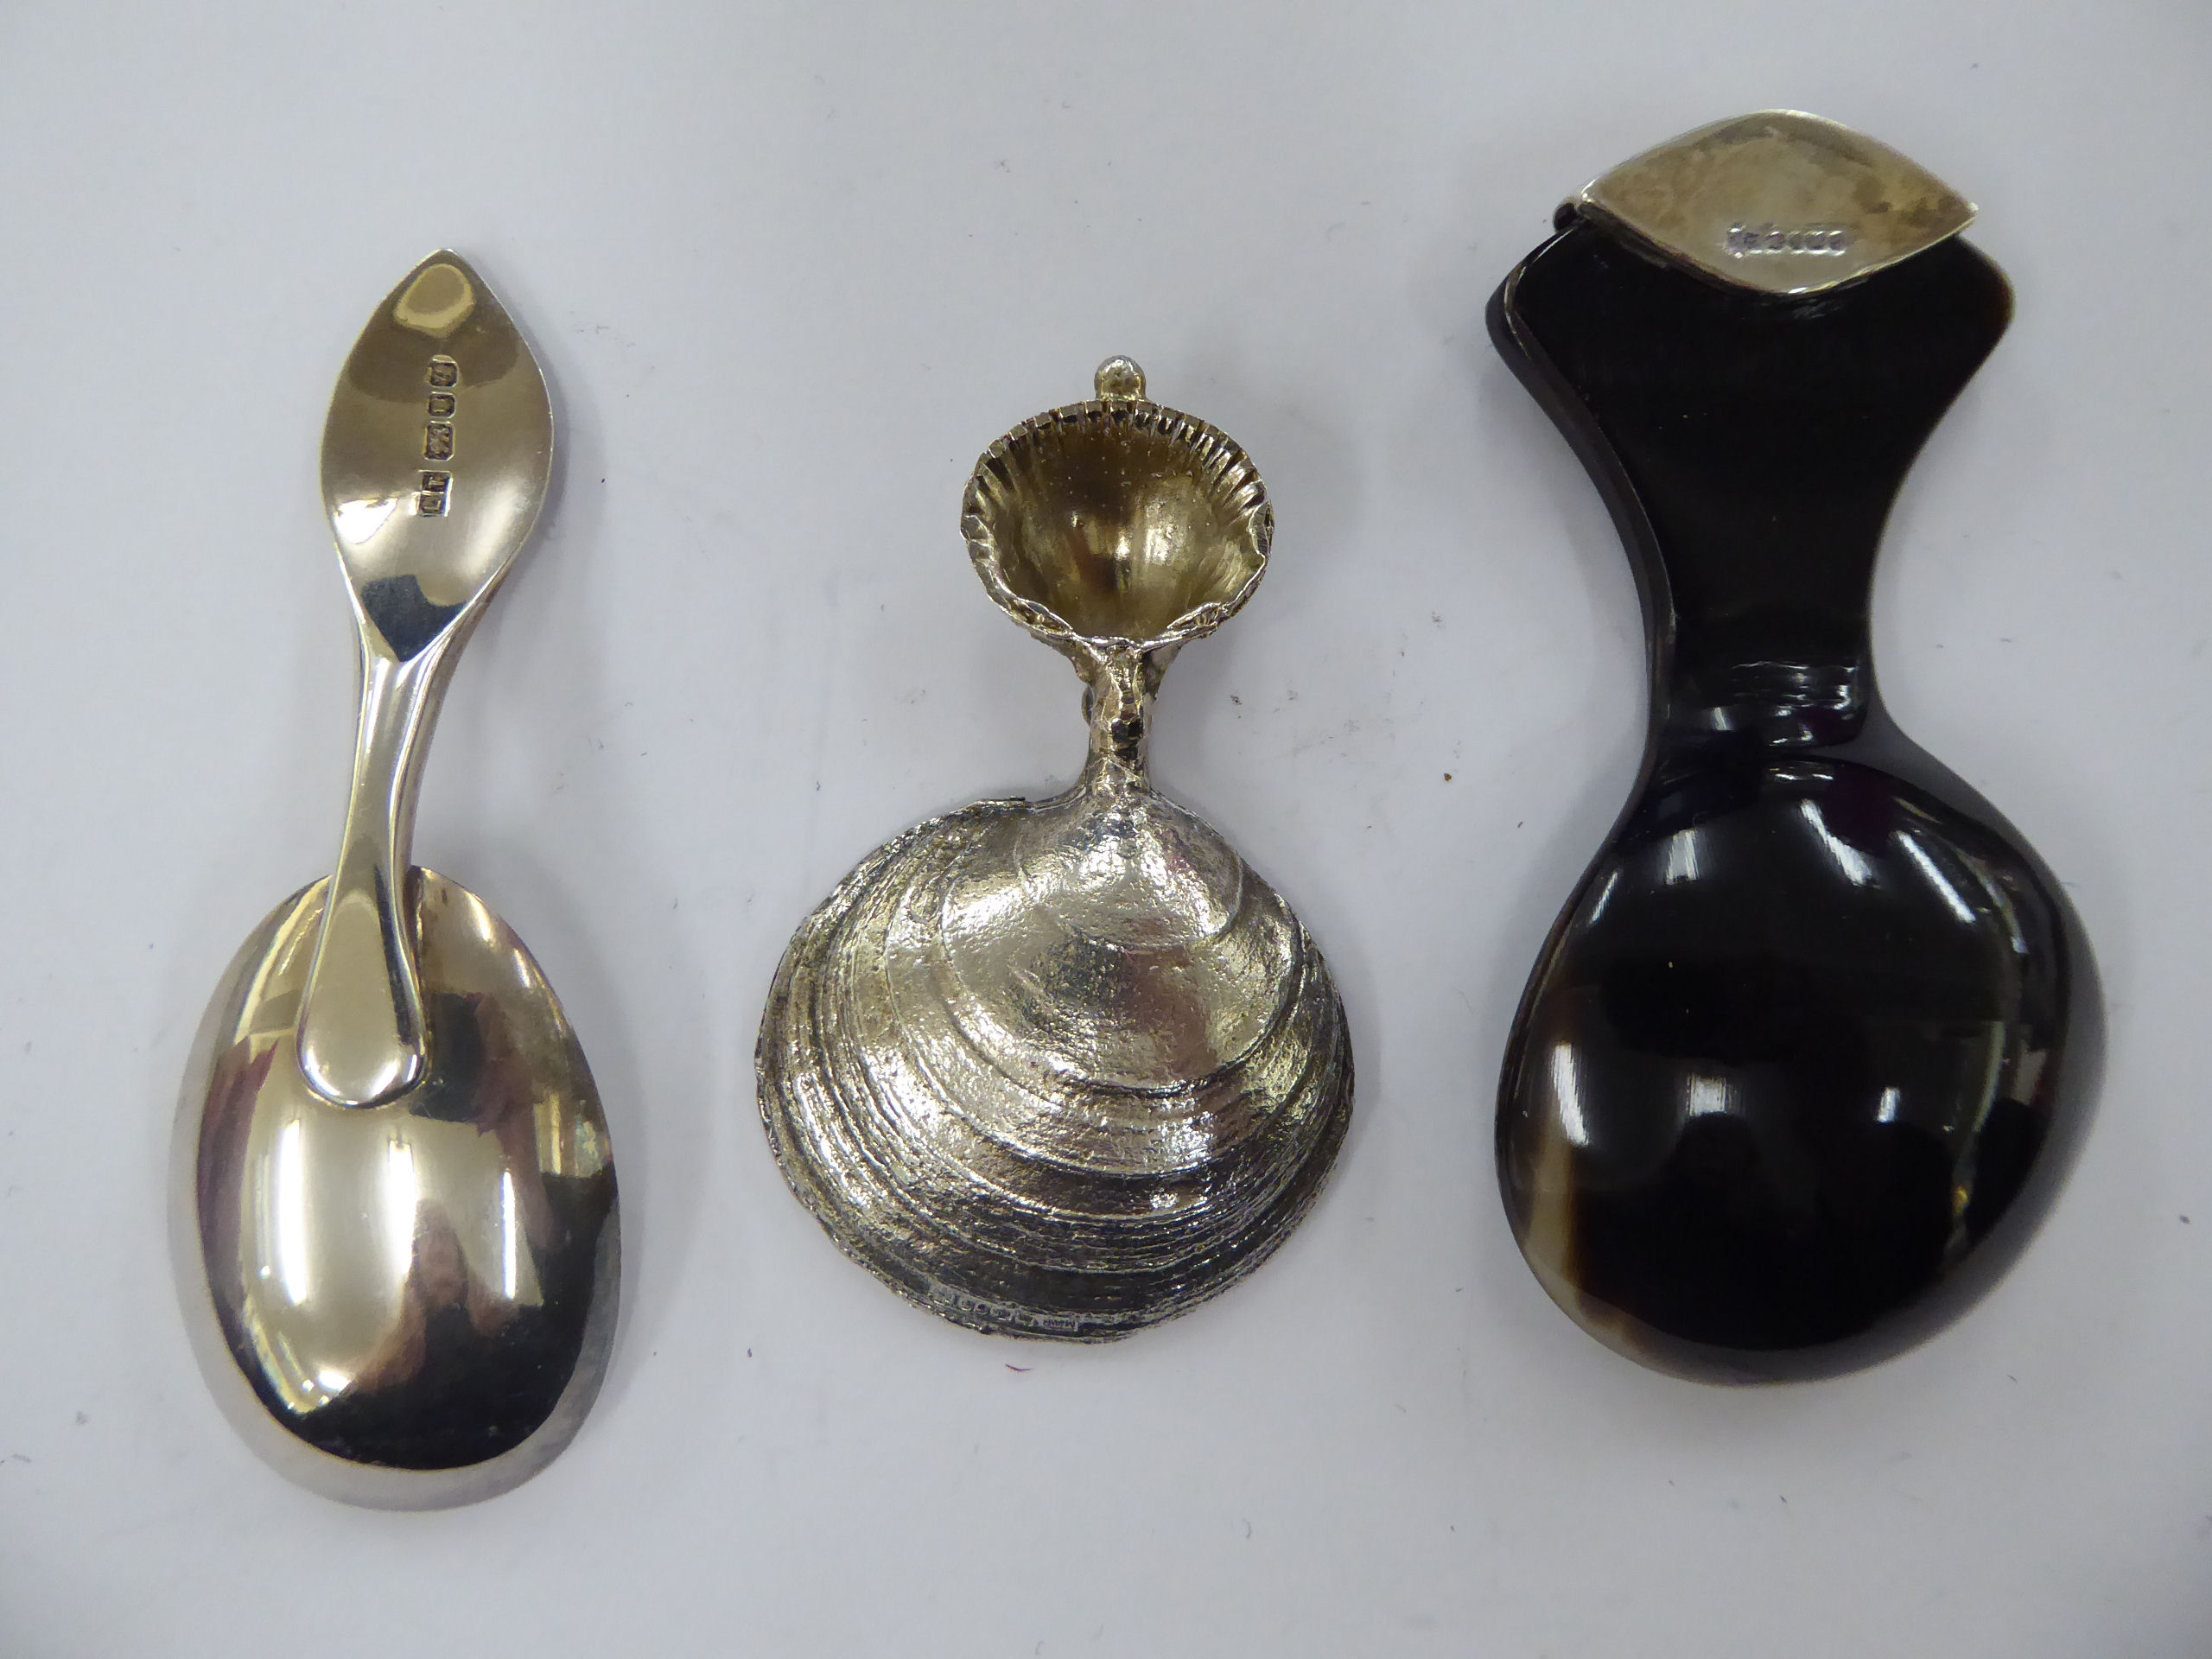 A cast silver caddy spoon, the bowl fashioned as a pearl in an oyster shell, - Image 2 of 2